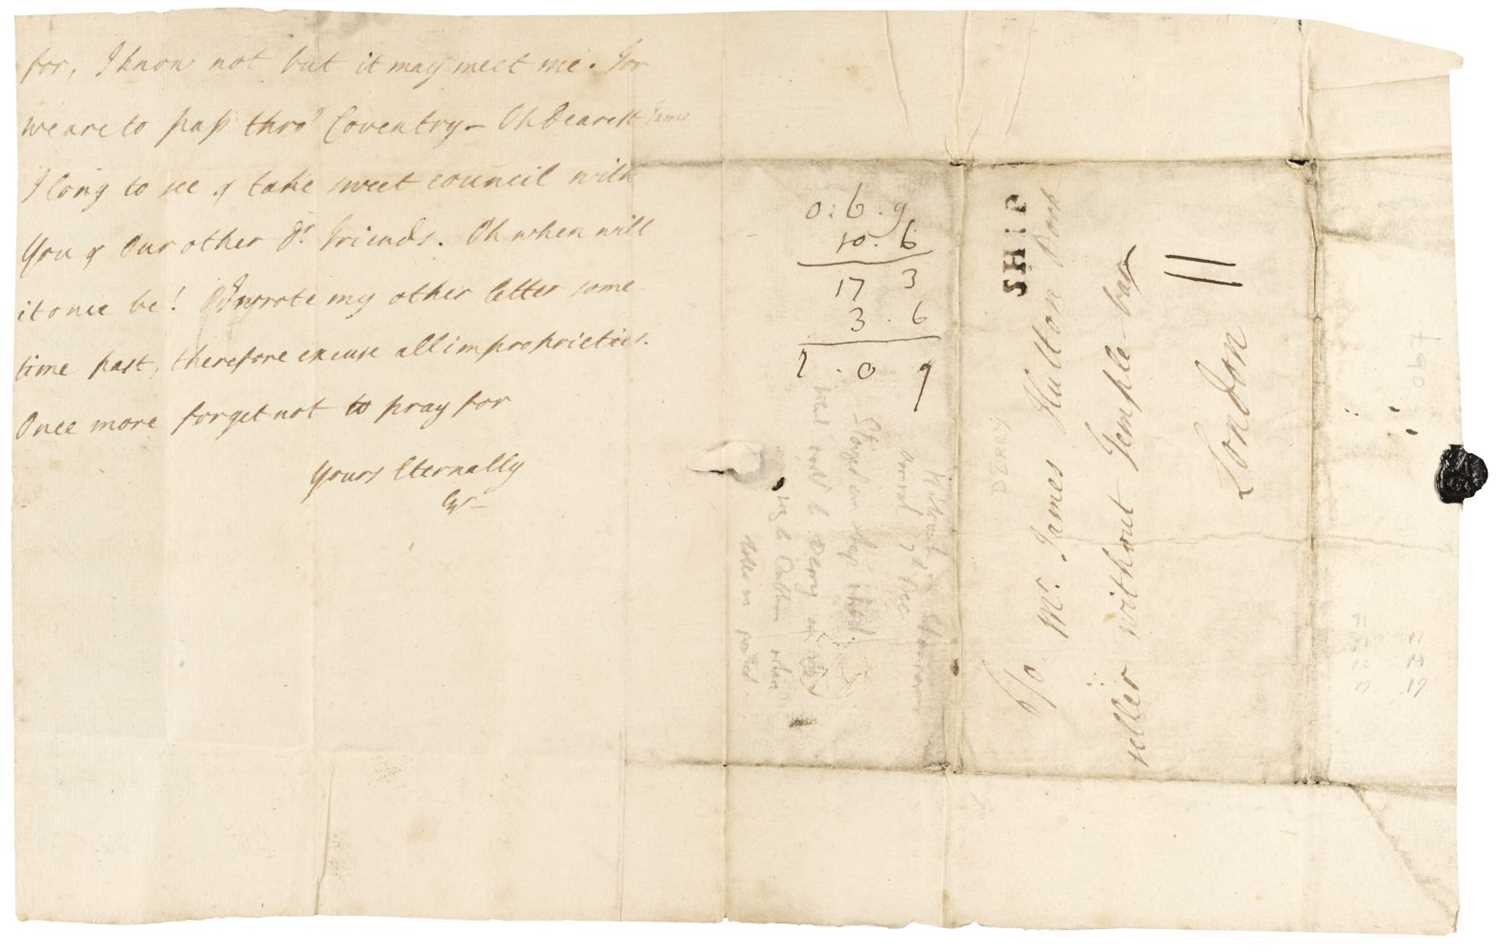 Lot 160 - Whitefield (George, 1714-1770). Autograph Letter Signed with initials, Ireland, 16 November 1738